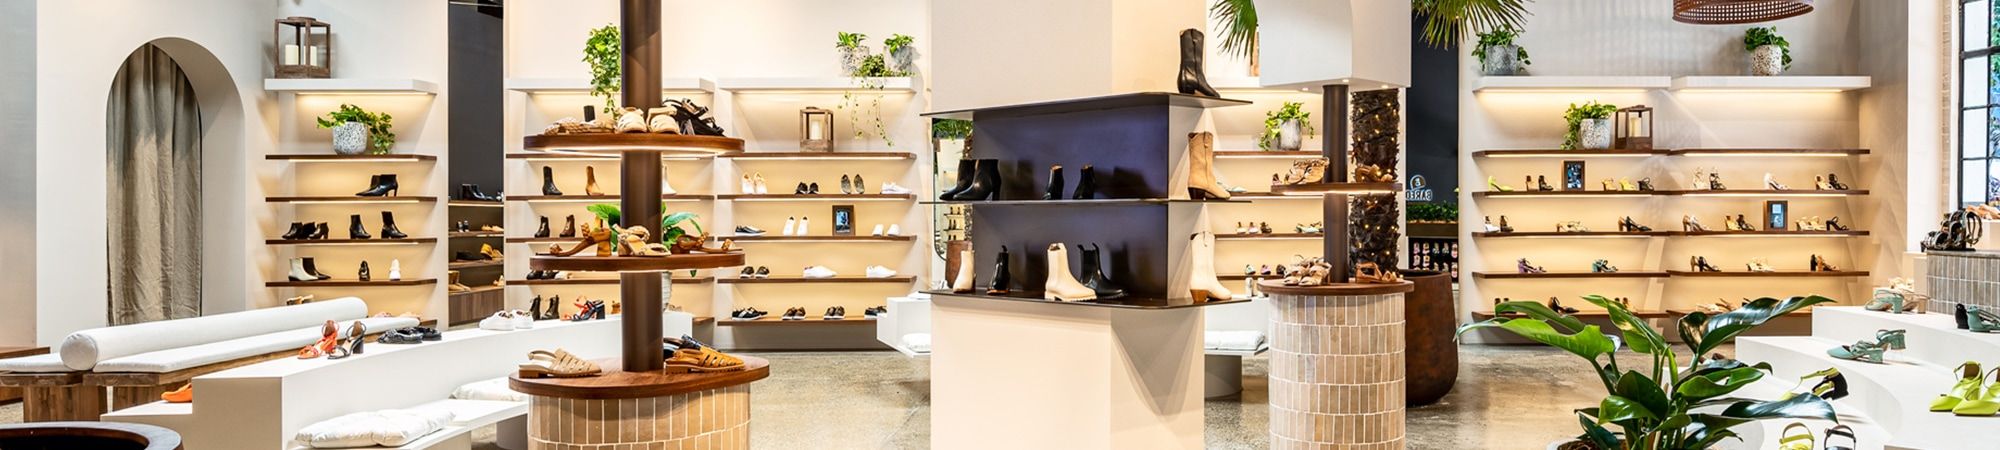 Bared Footwear Stores